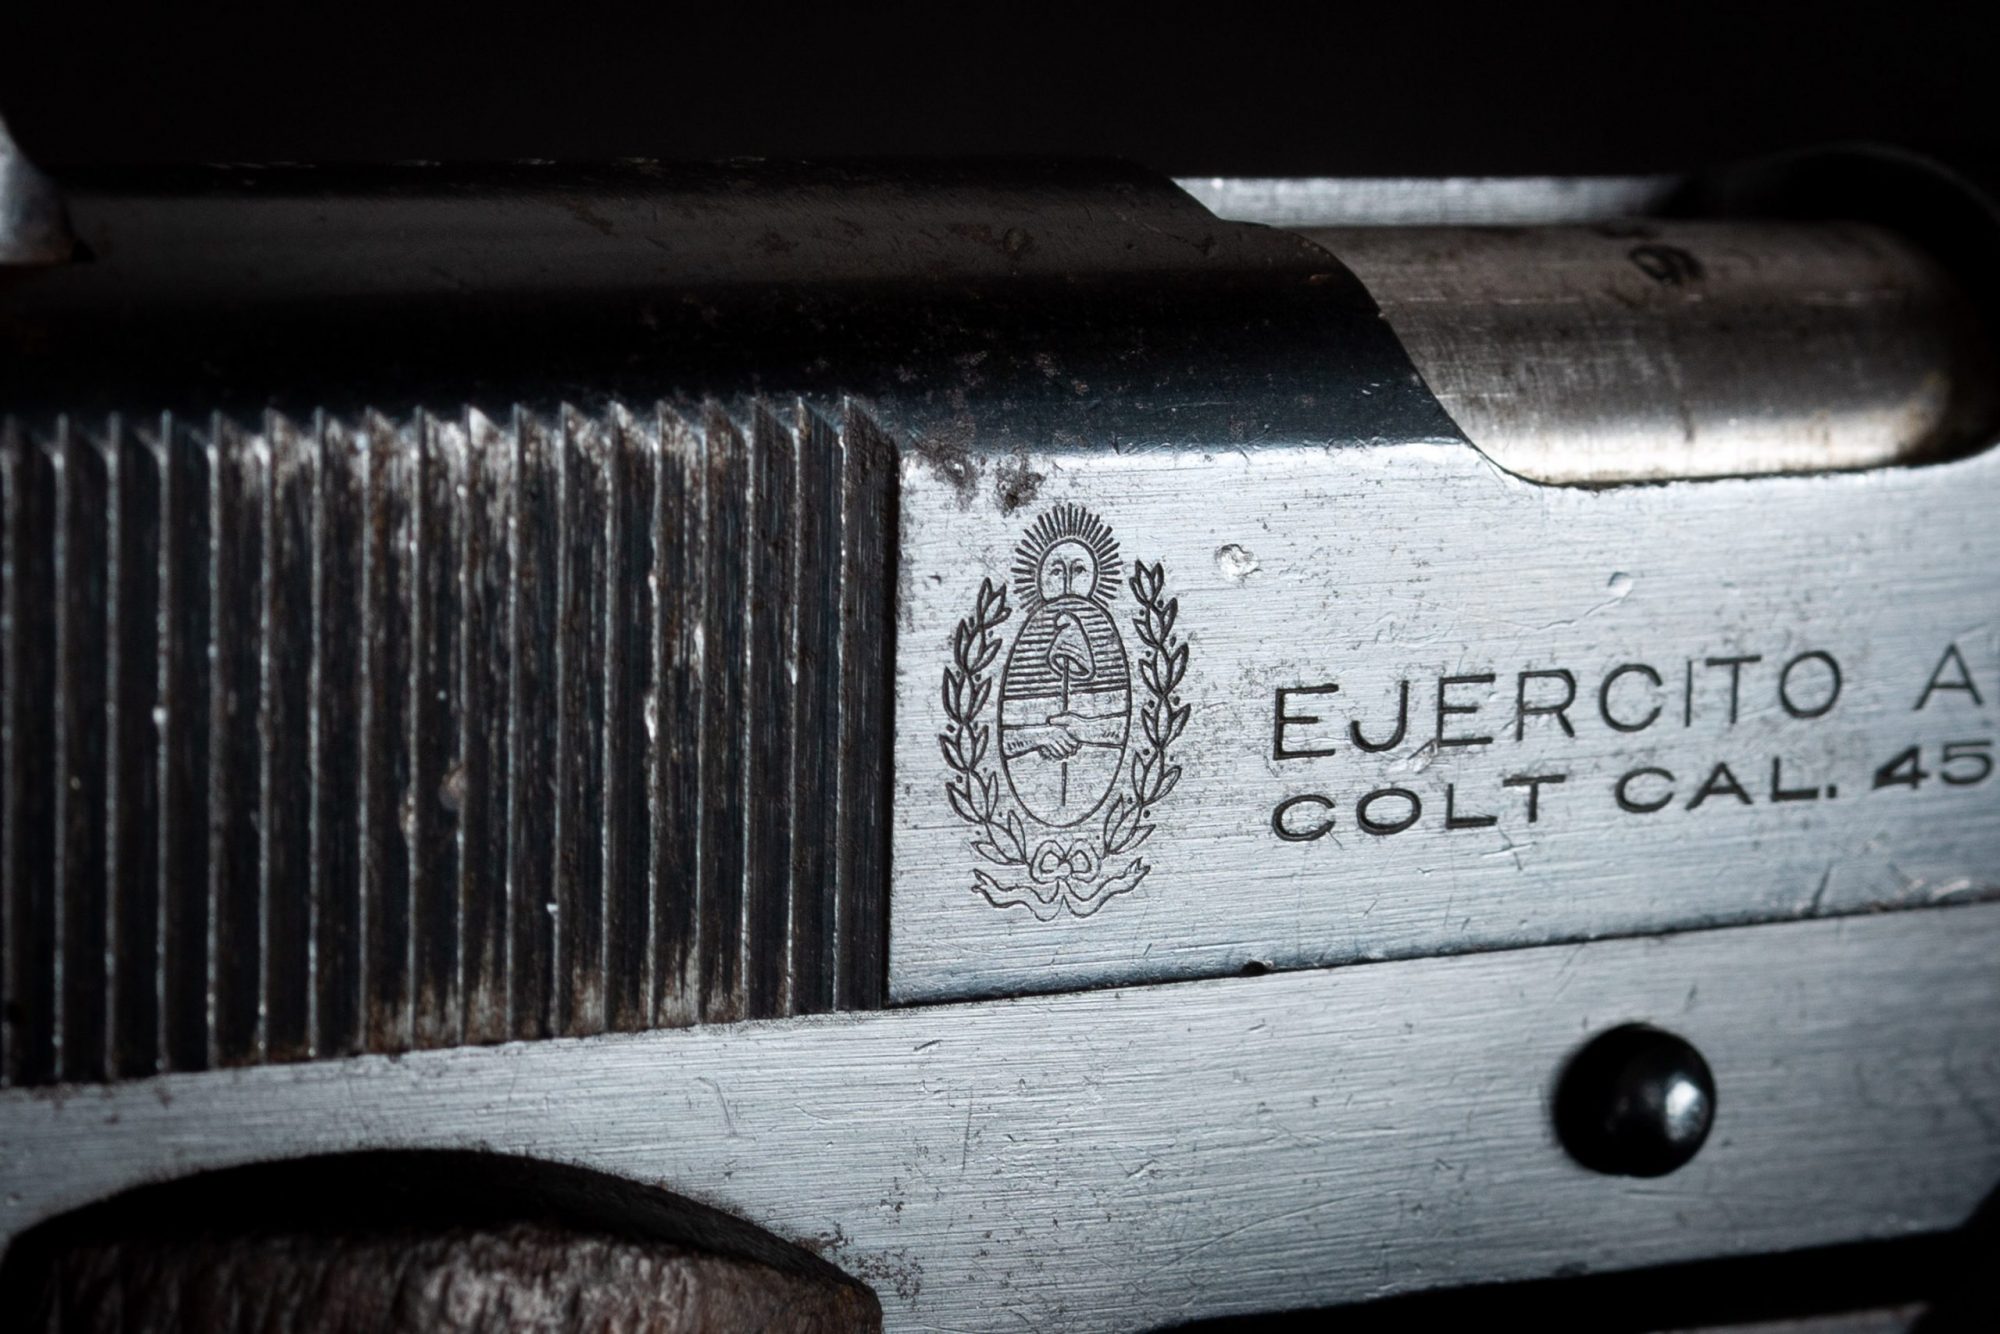 Photo of a pre-owned Argentino Colt 1911, for sale by Turnbull Restoration of Bloomfield, NY